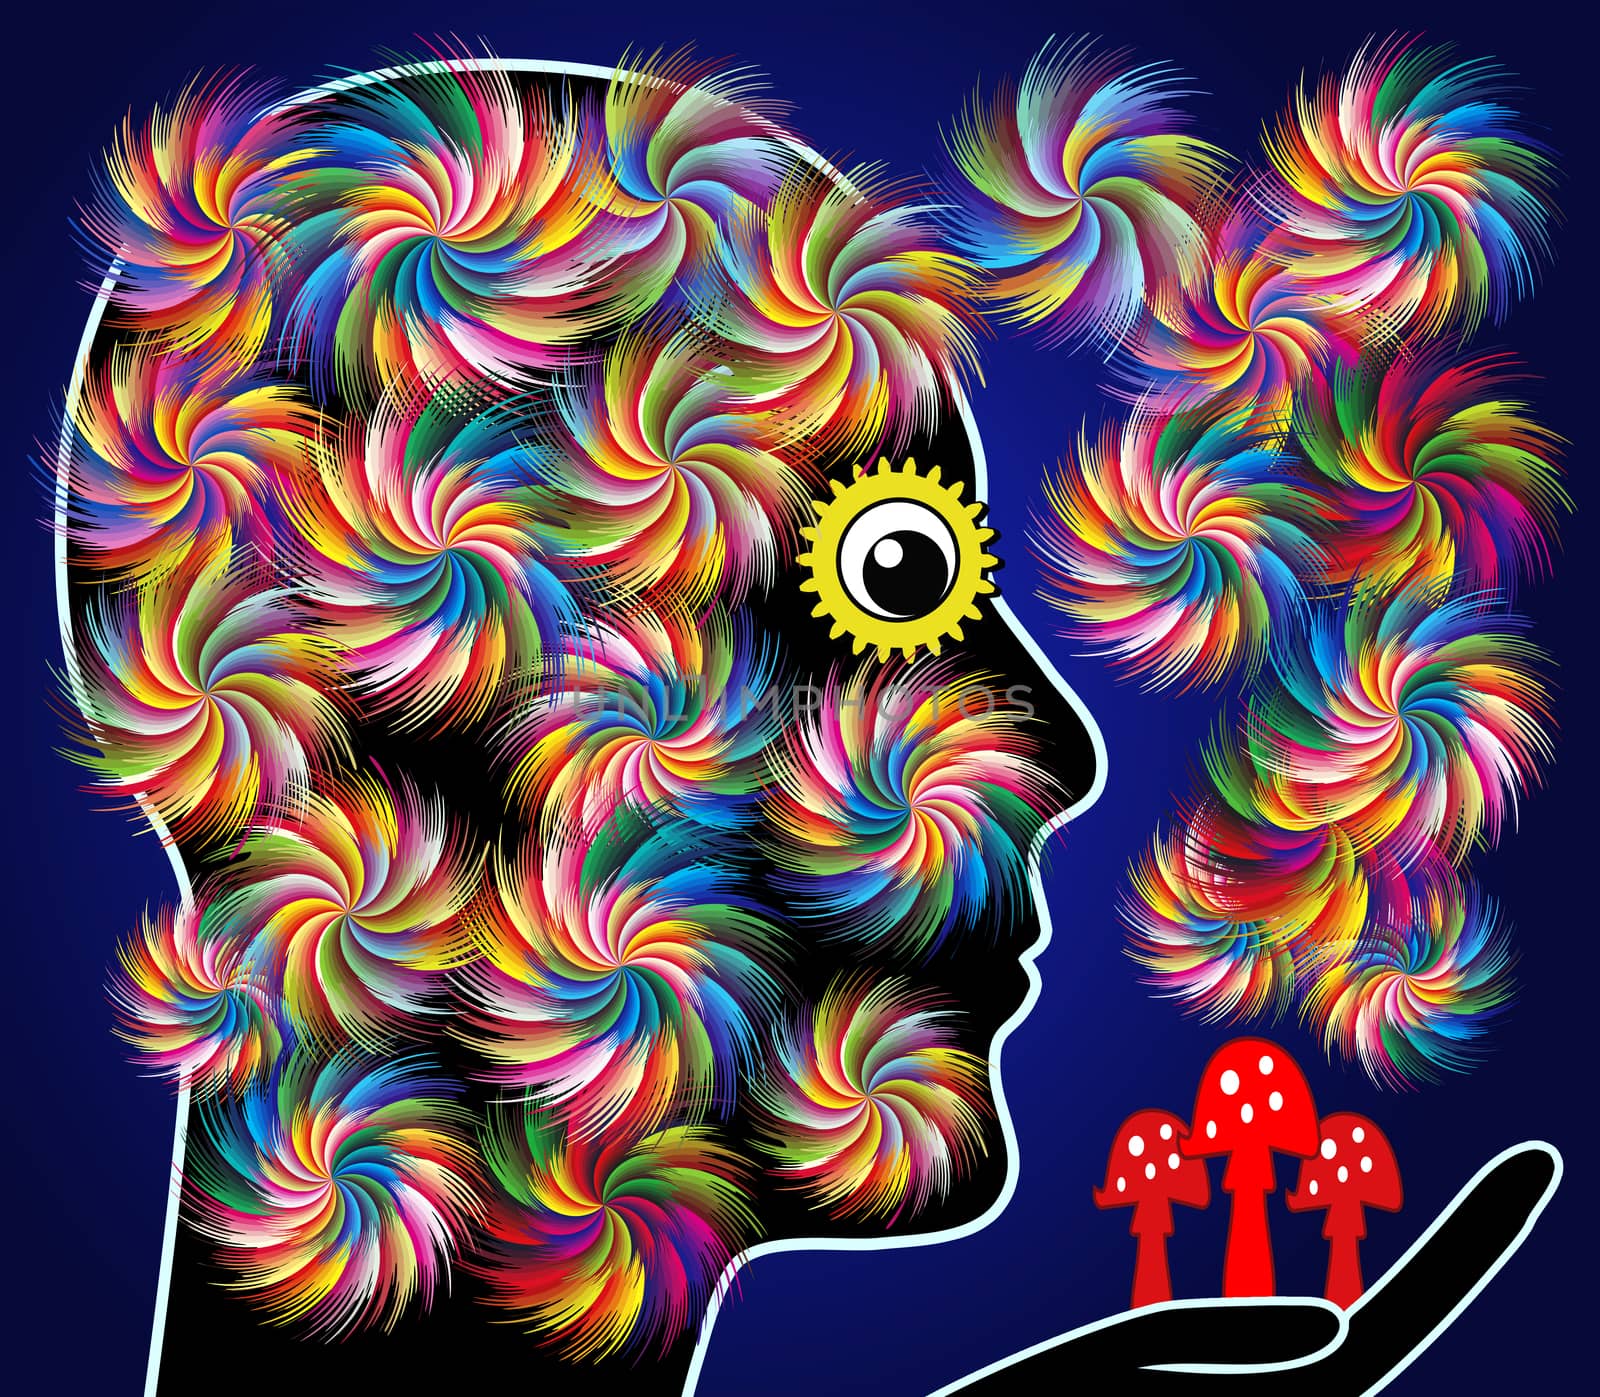 Person falls into euphoria after consuming psychedelic mushrooms